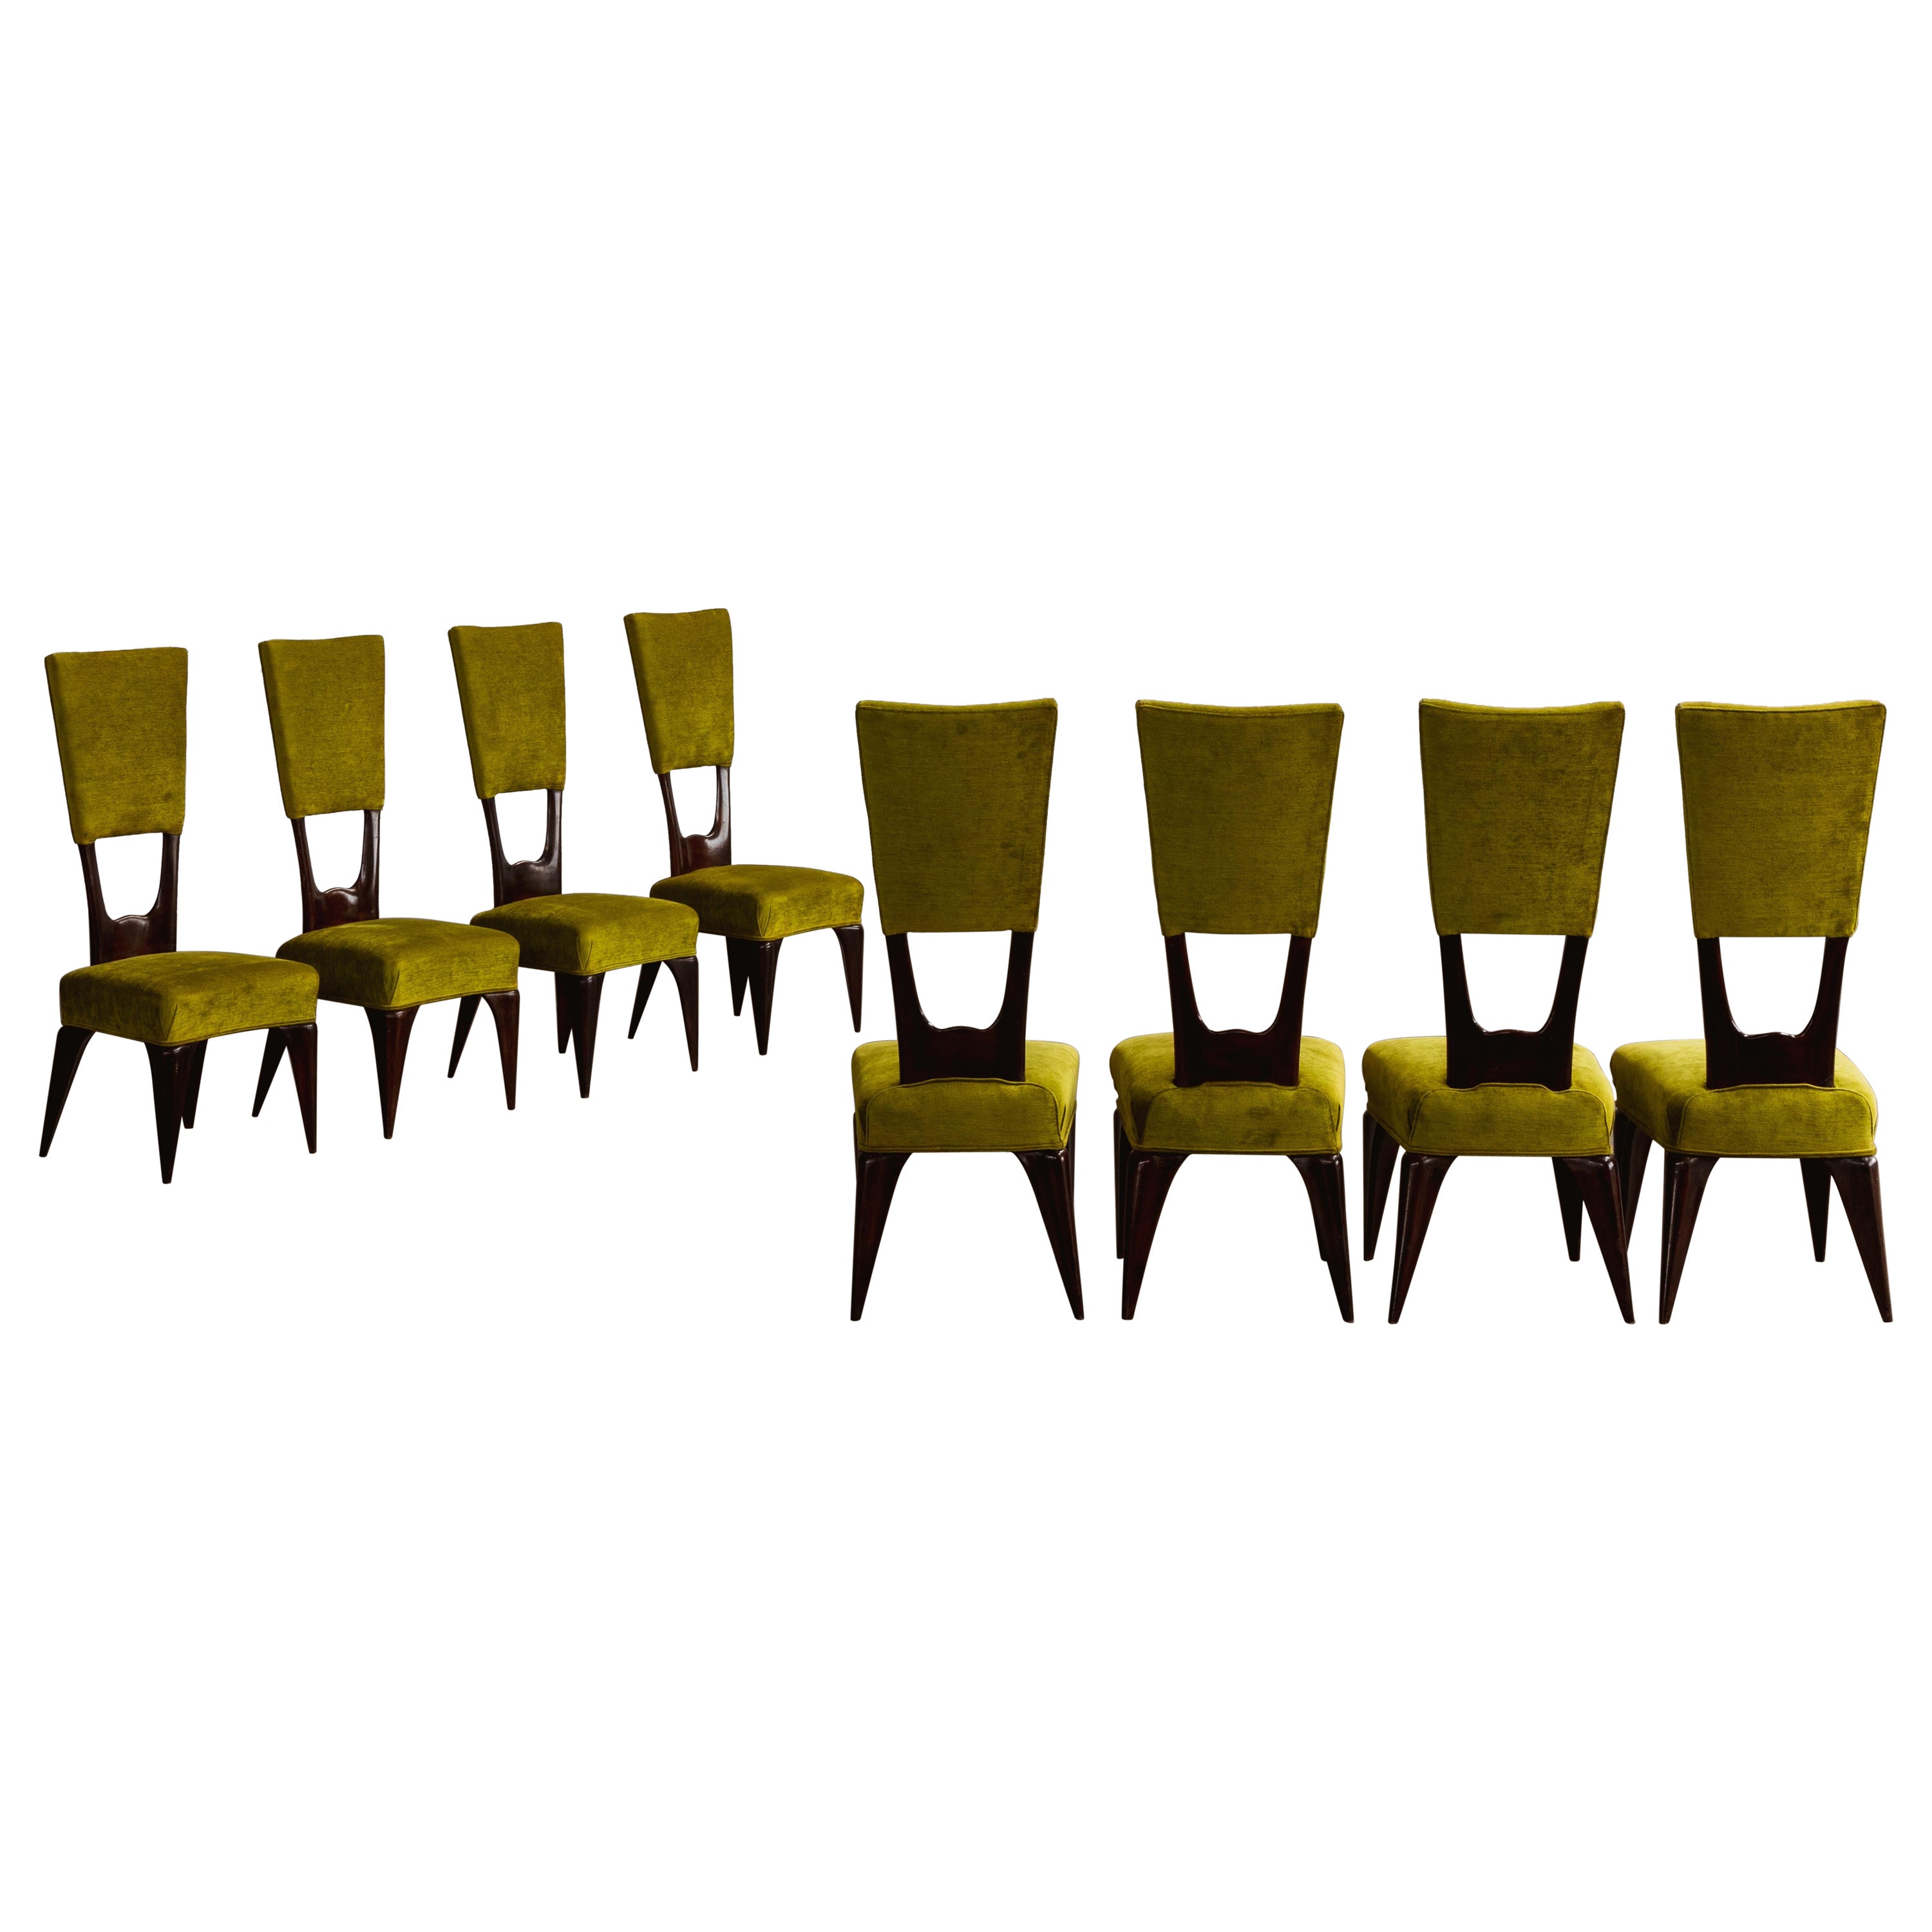 Vittorio Valabrega Dining Chairs, 1950s, Set of 8 For Sale